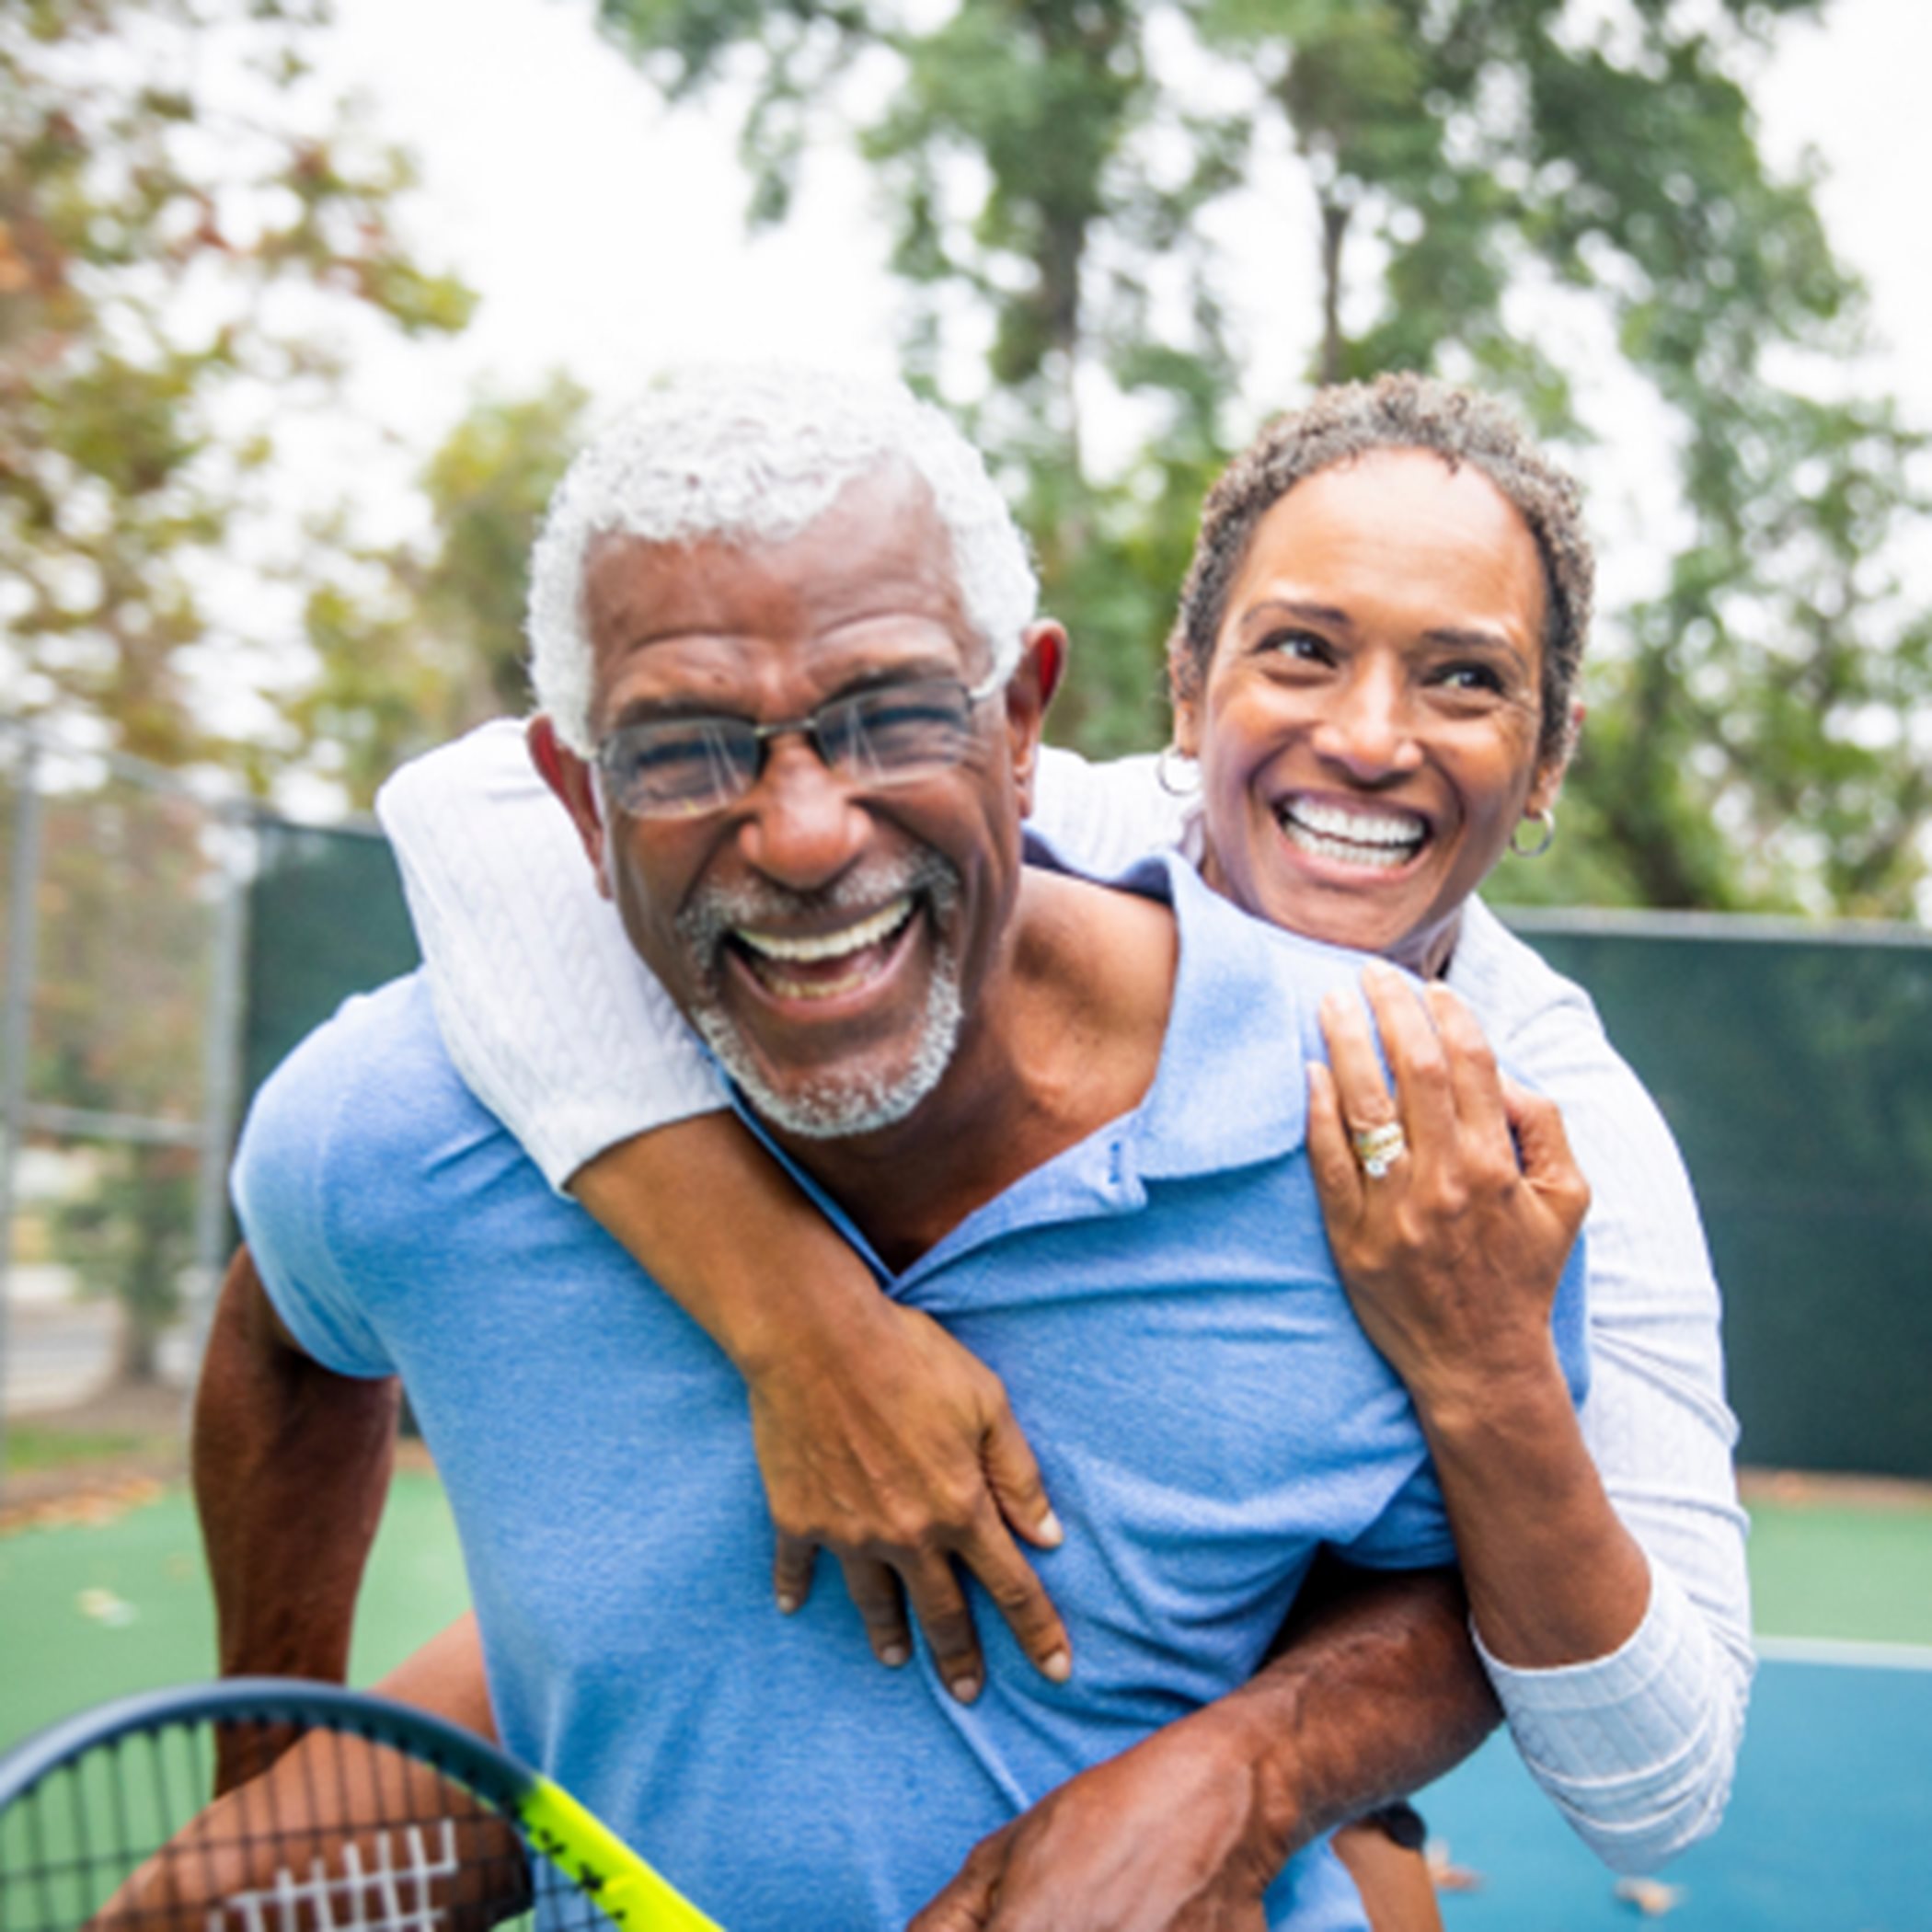 Couple smiling at tennis court